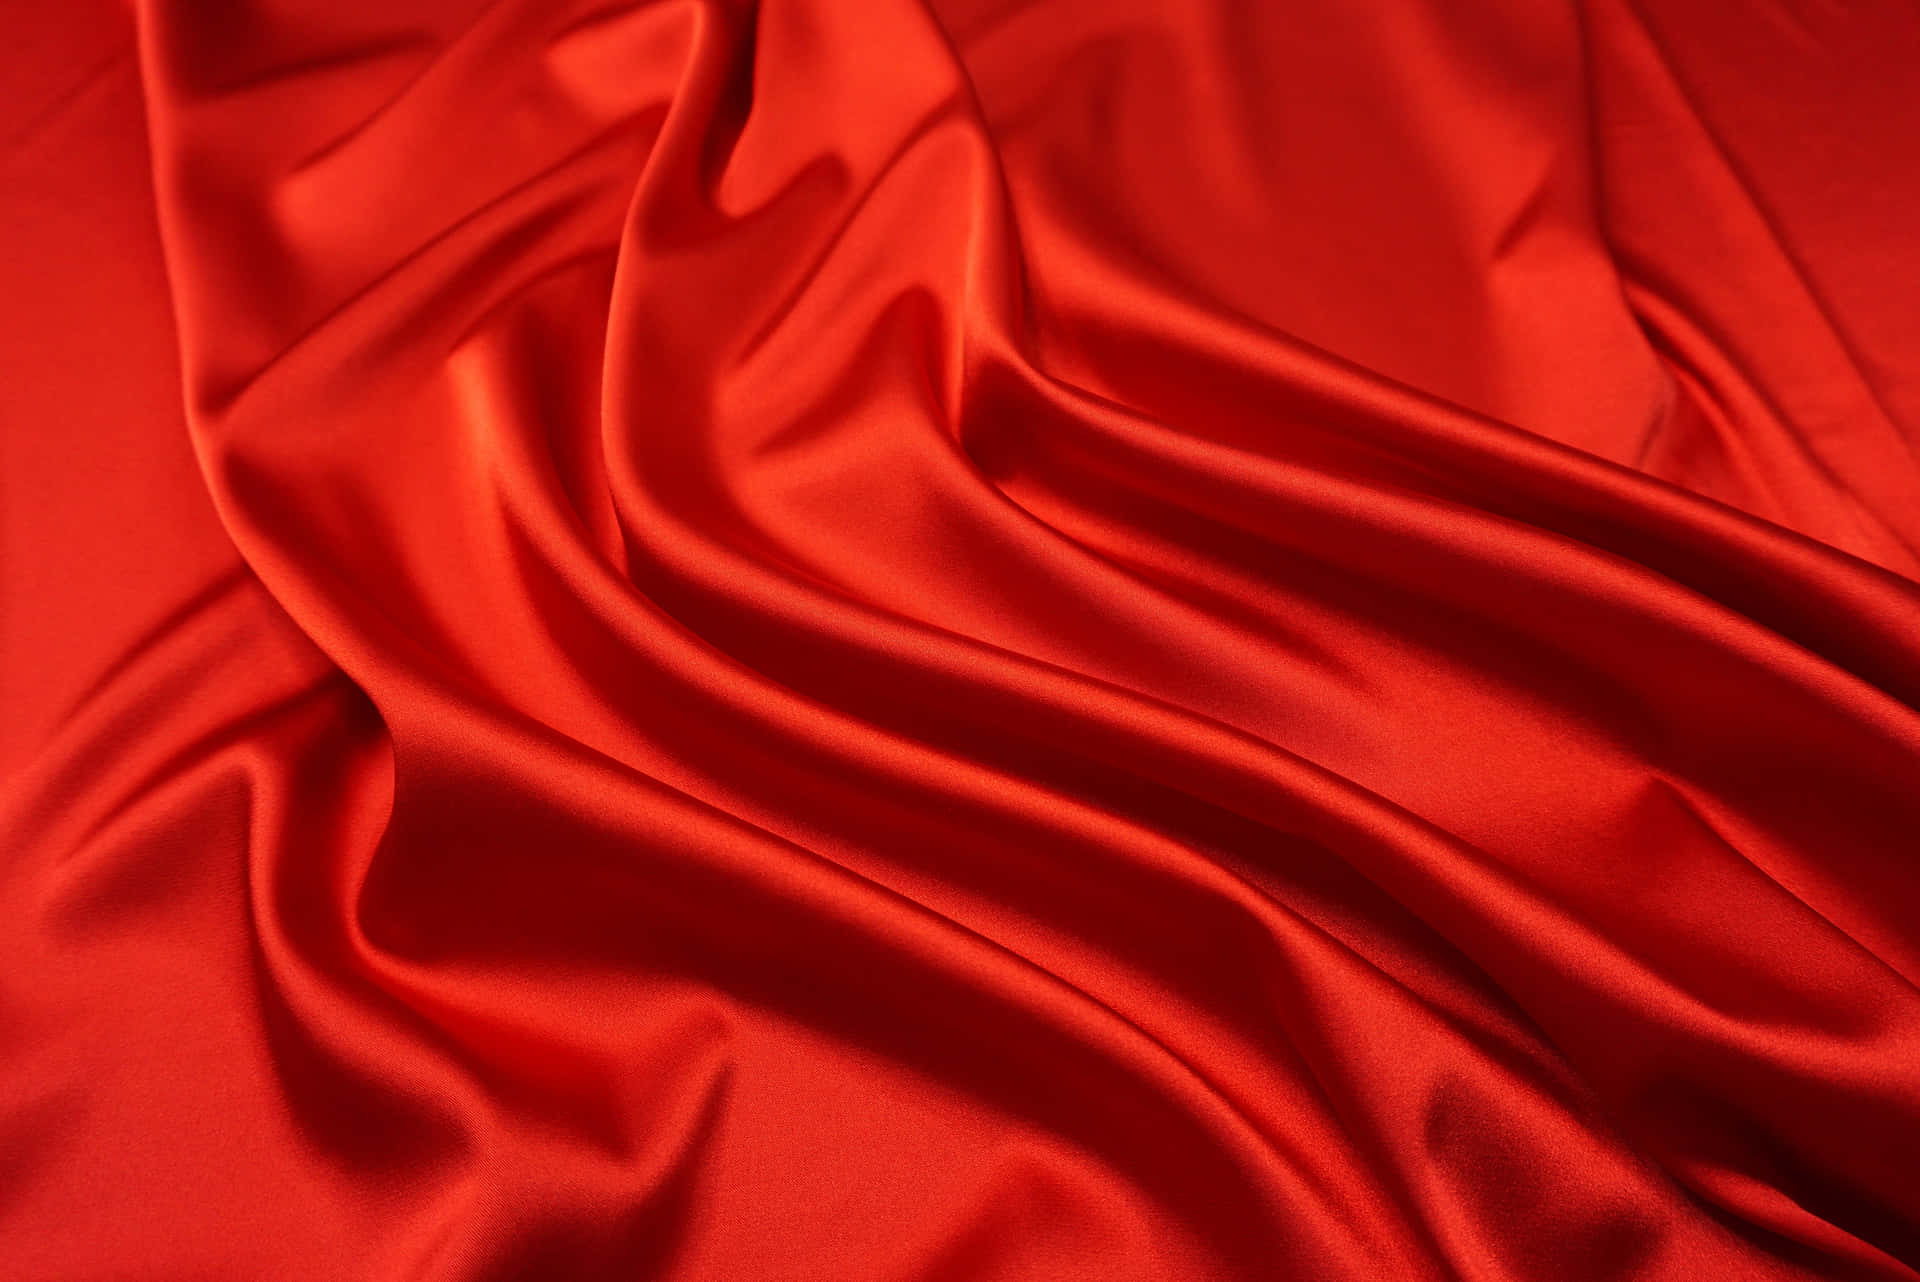 Red Silk Fabric Background